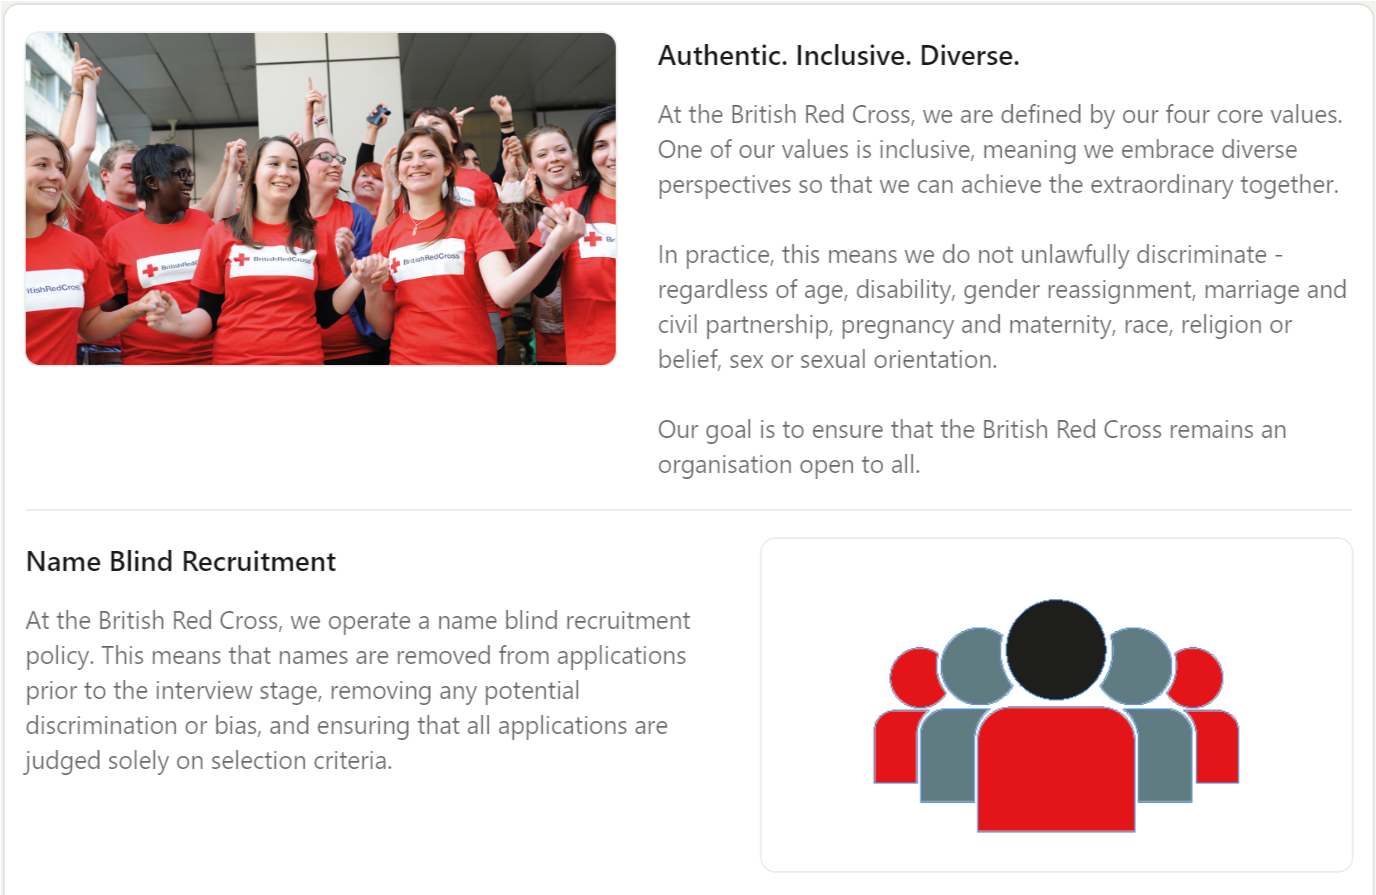 Details of the British Red Cross's Career Page, which includes a section on DEI and the organization's Name Blind Recruitment process.